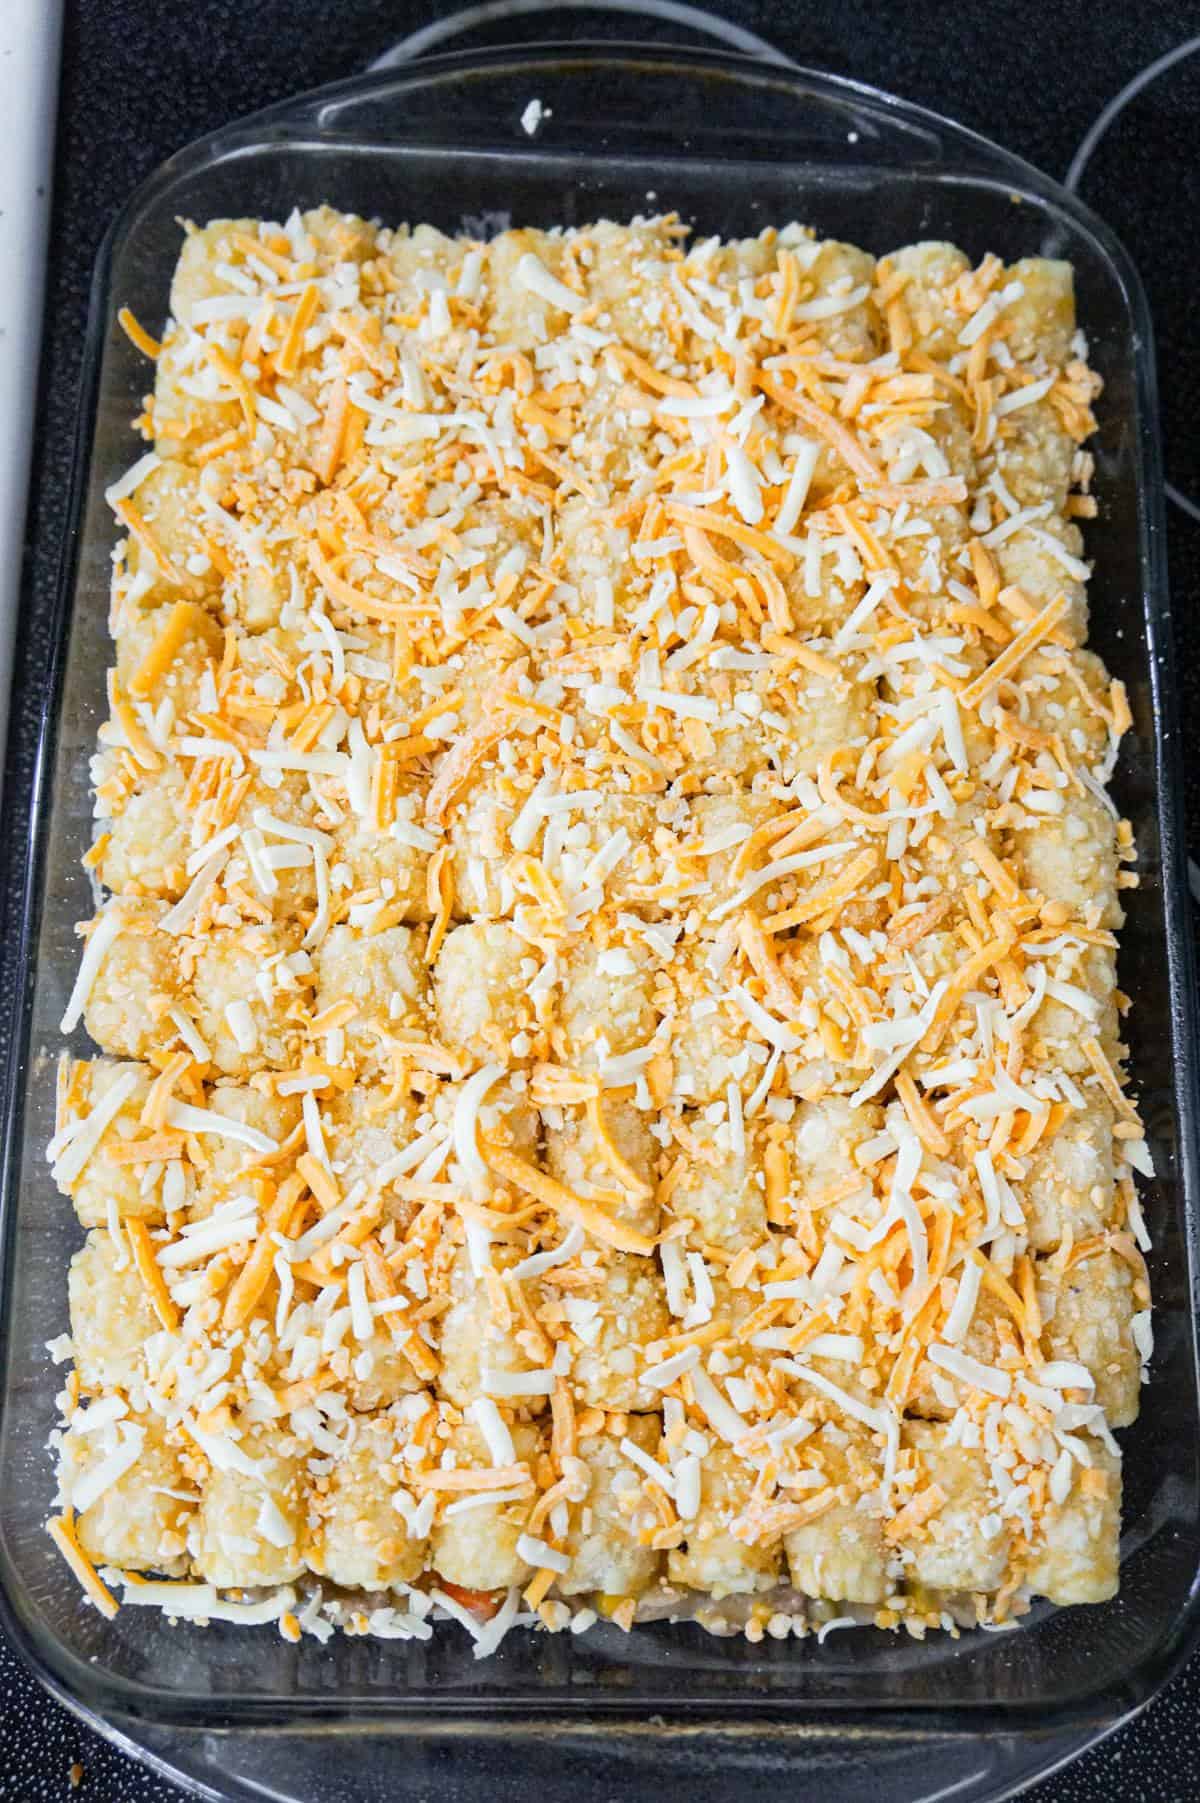 shredded cheddar cheese on top of tater tot casserole before baking